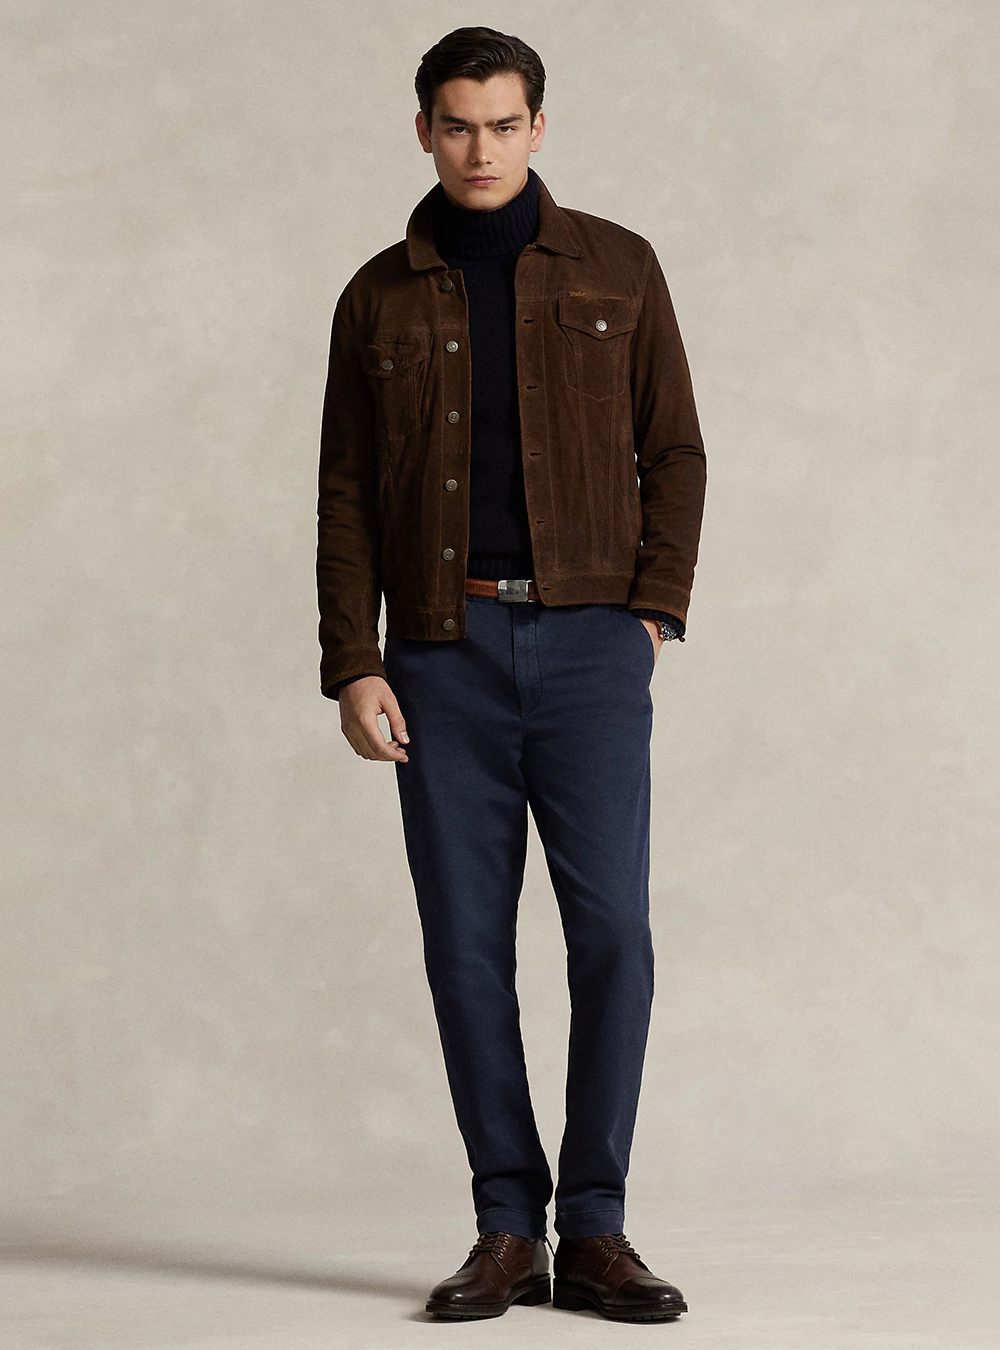 brown suede jacket, black turtleneck, navy chinos, and brown derby shoes